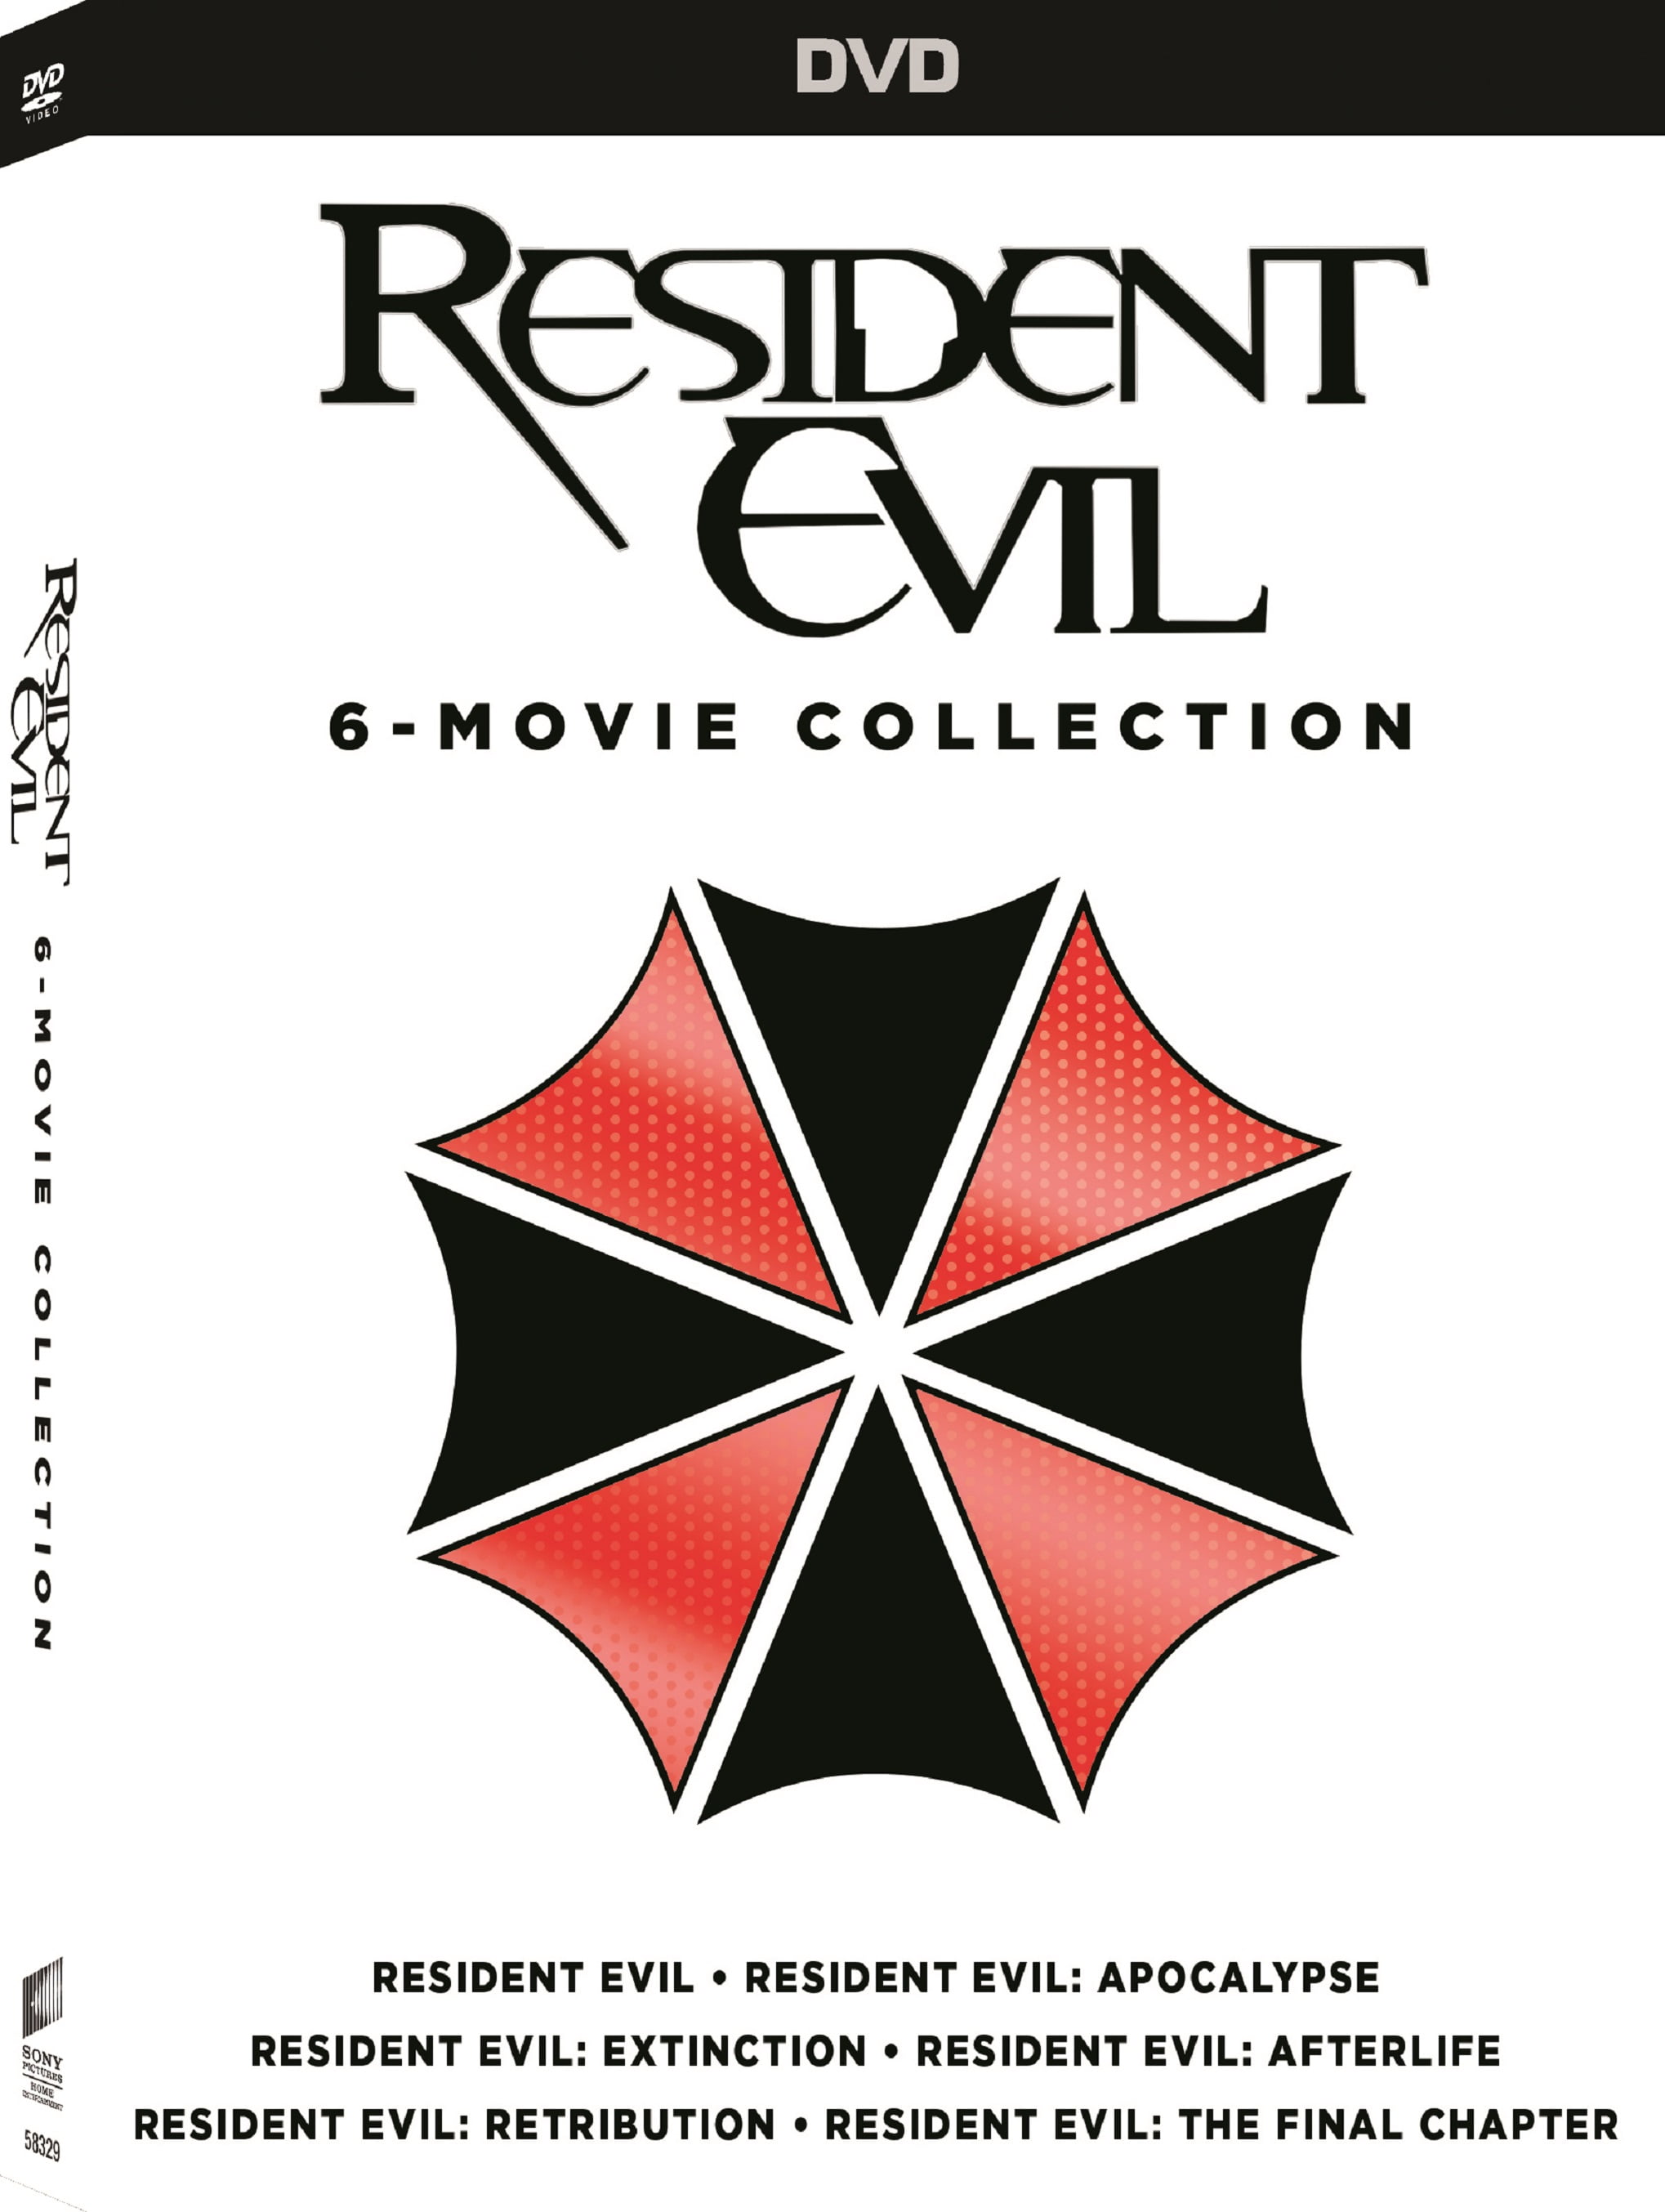 The 4-Movie Resident Evil Collection (Resident Evil/Resident  Evil:Apocalypse/Resident Evil:Extinction/Resident Evil:Afterlife)